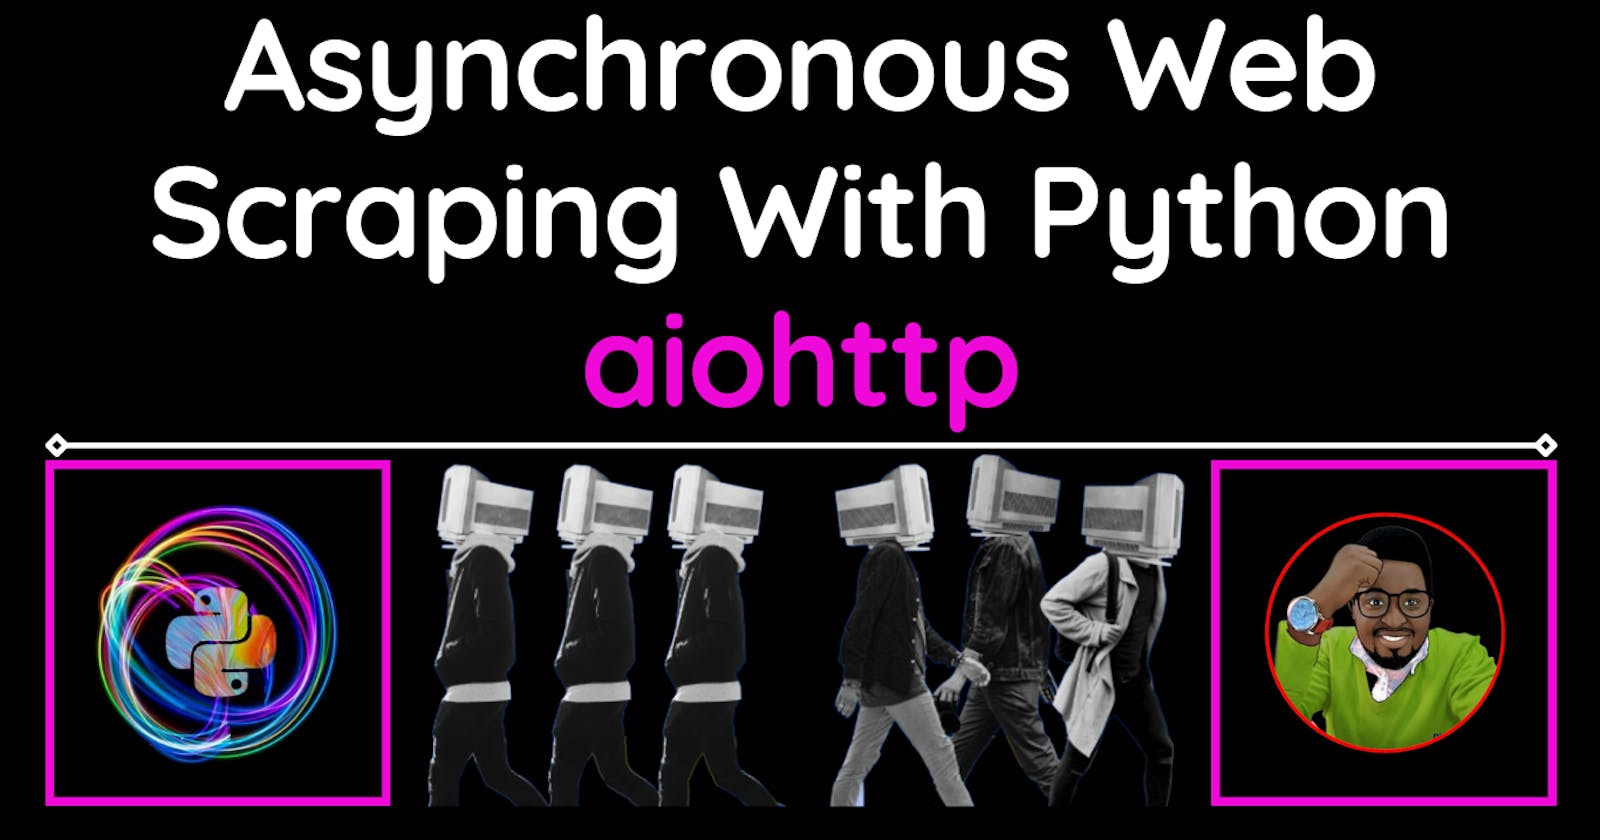 Asynchronous Web Scraping With Python AIOHTTP